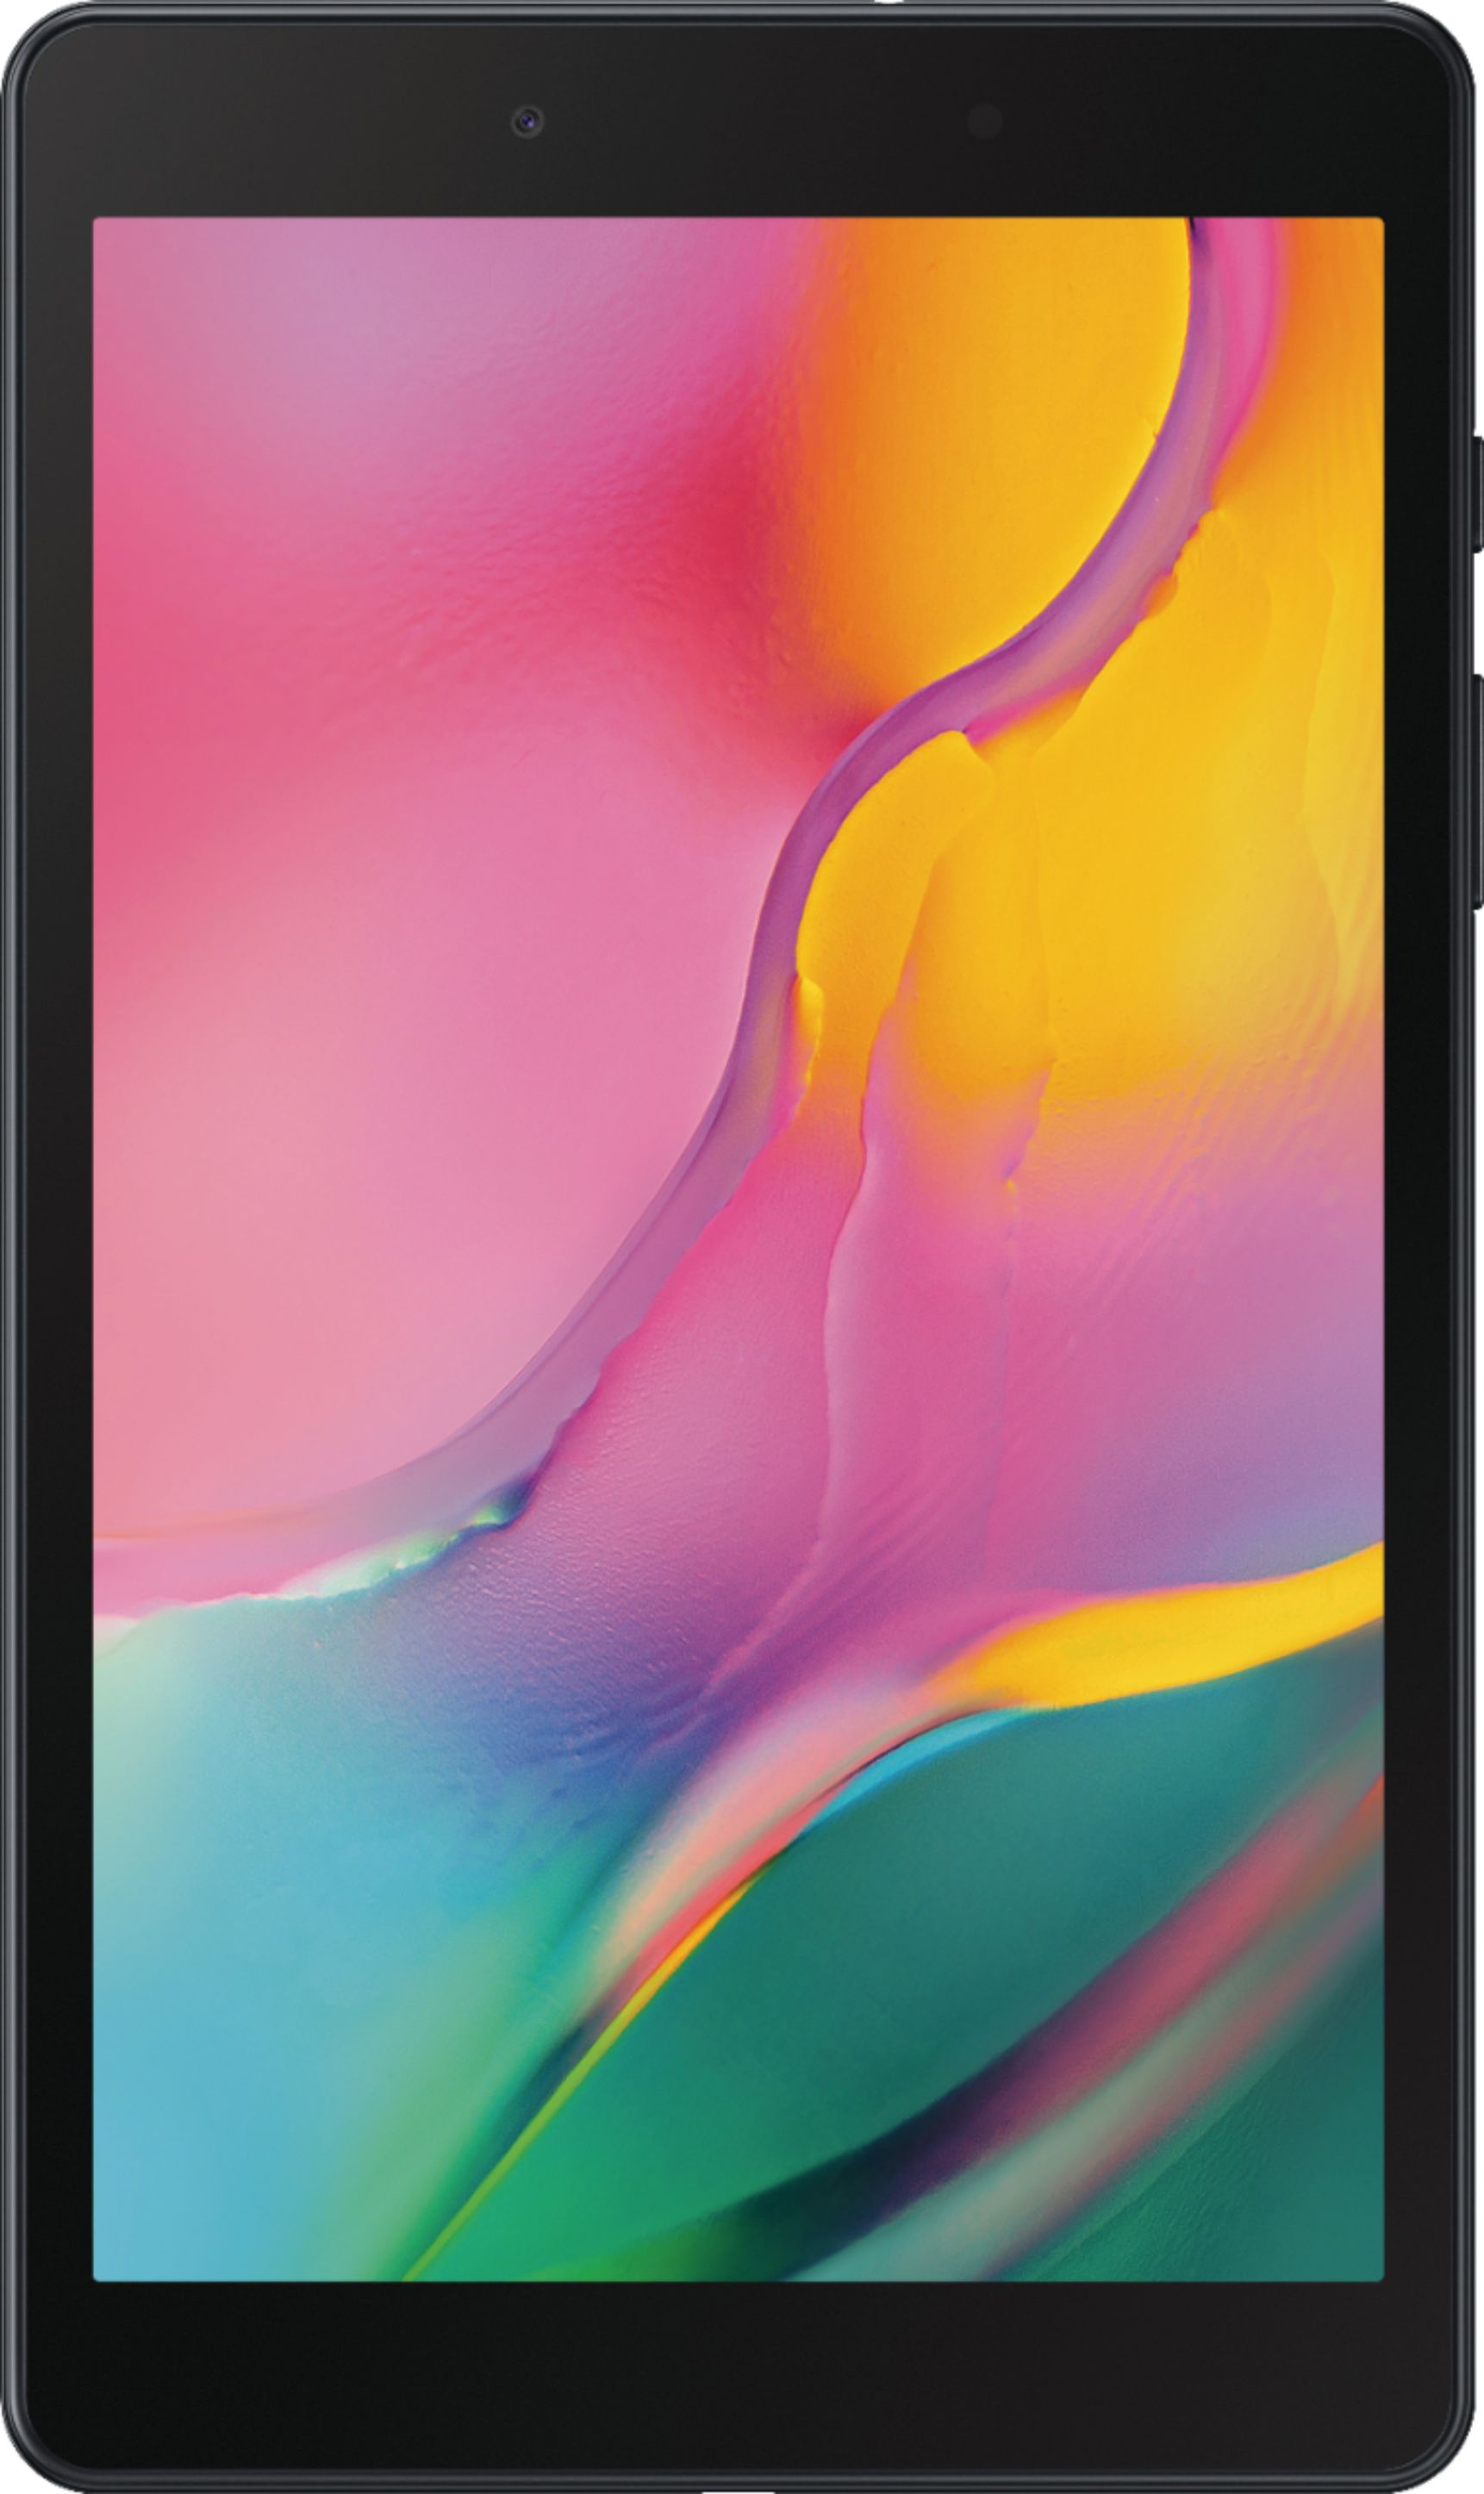 Questions And Answers Samsung Galaxy Tab A 2019 8 32gb Black Sm T290nzkaxar Best Buy - roblox download for samsung tablet